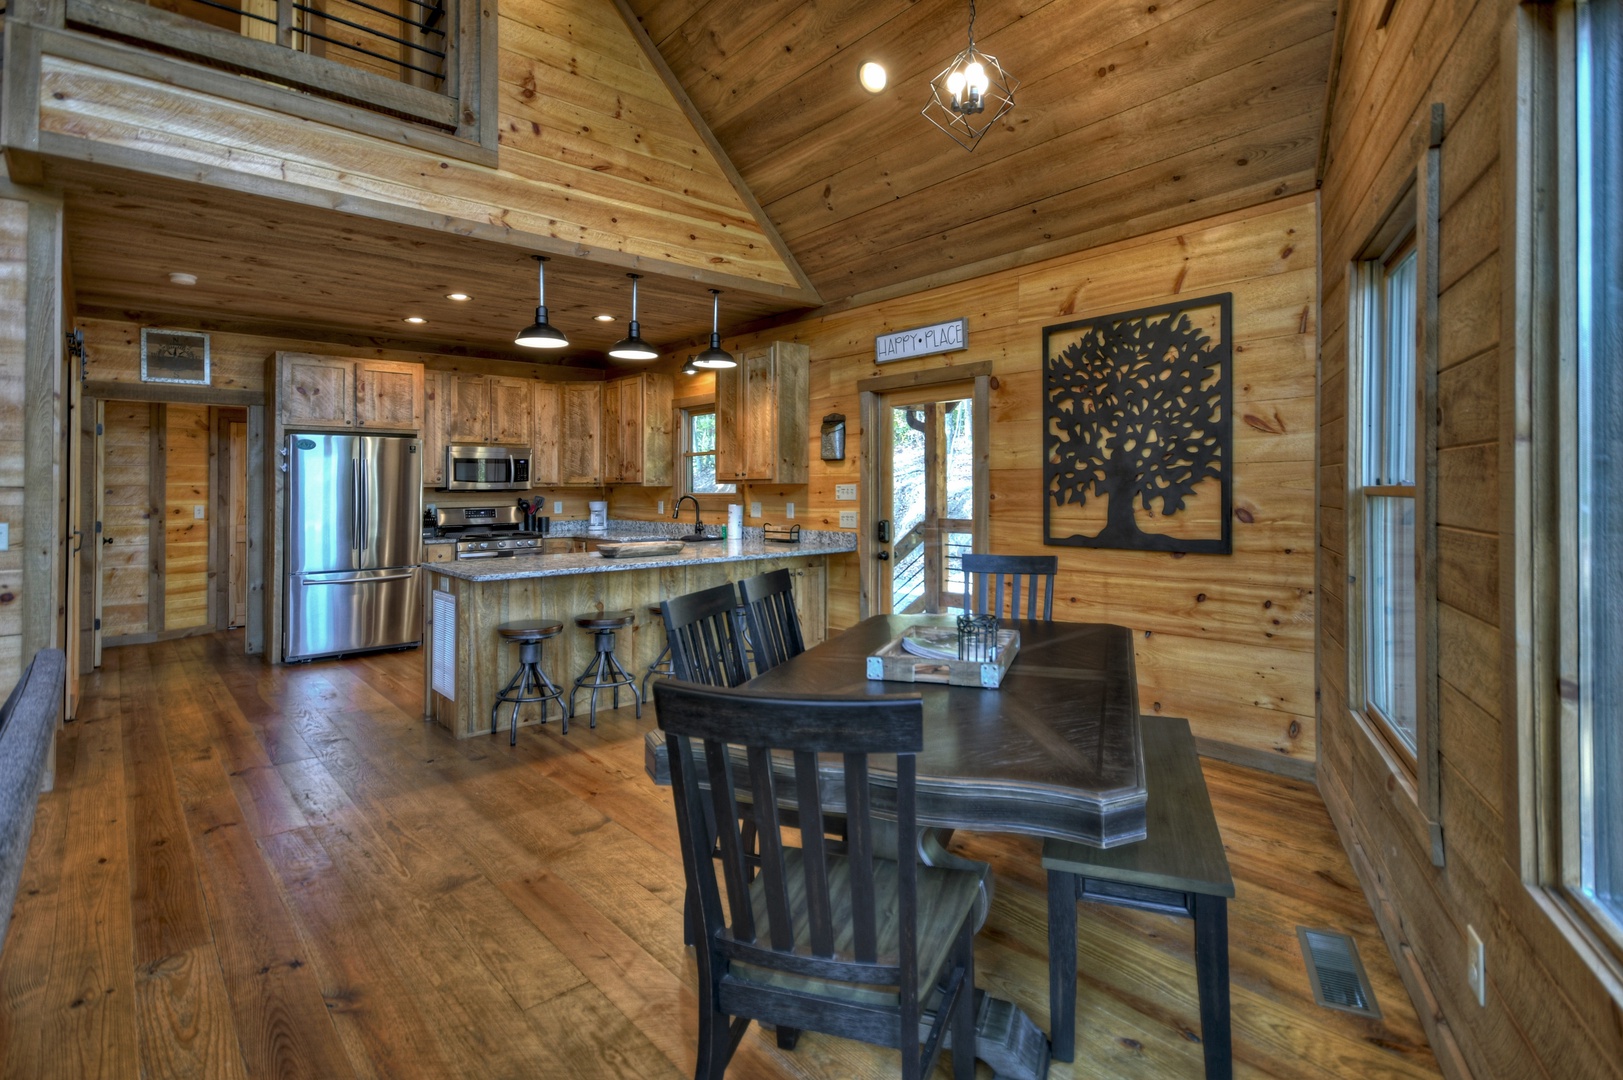 Cedar Ridge- Dining area with view of the kitchen